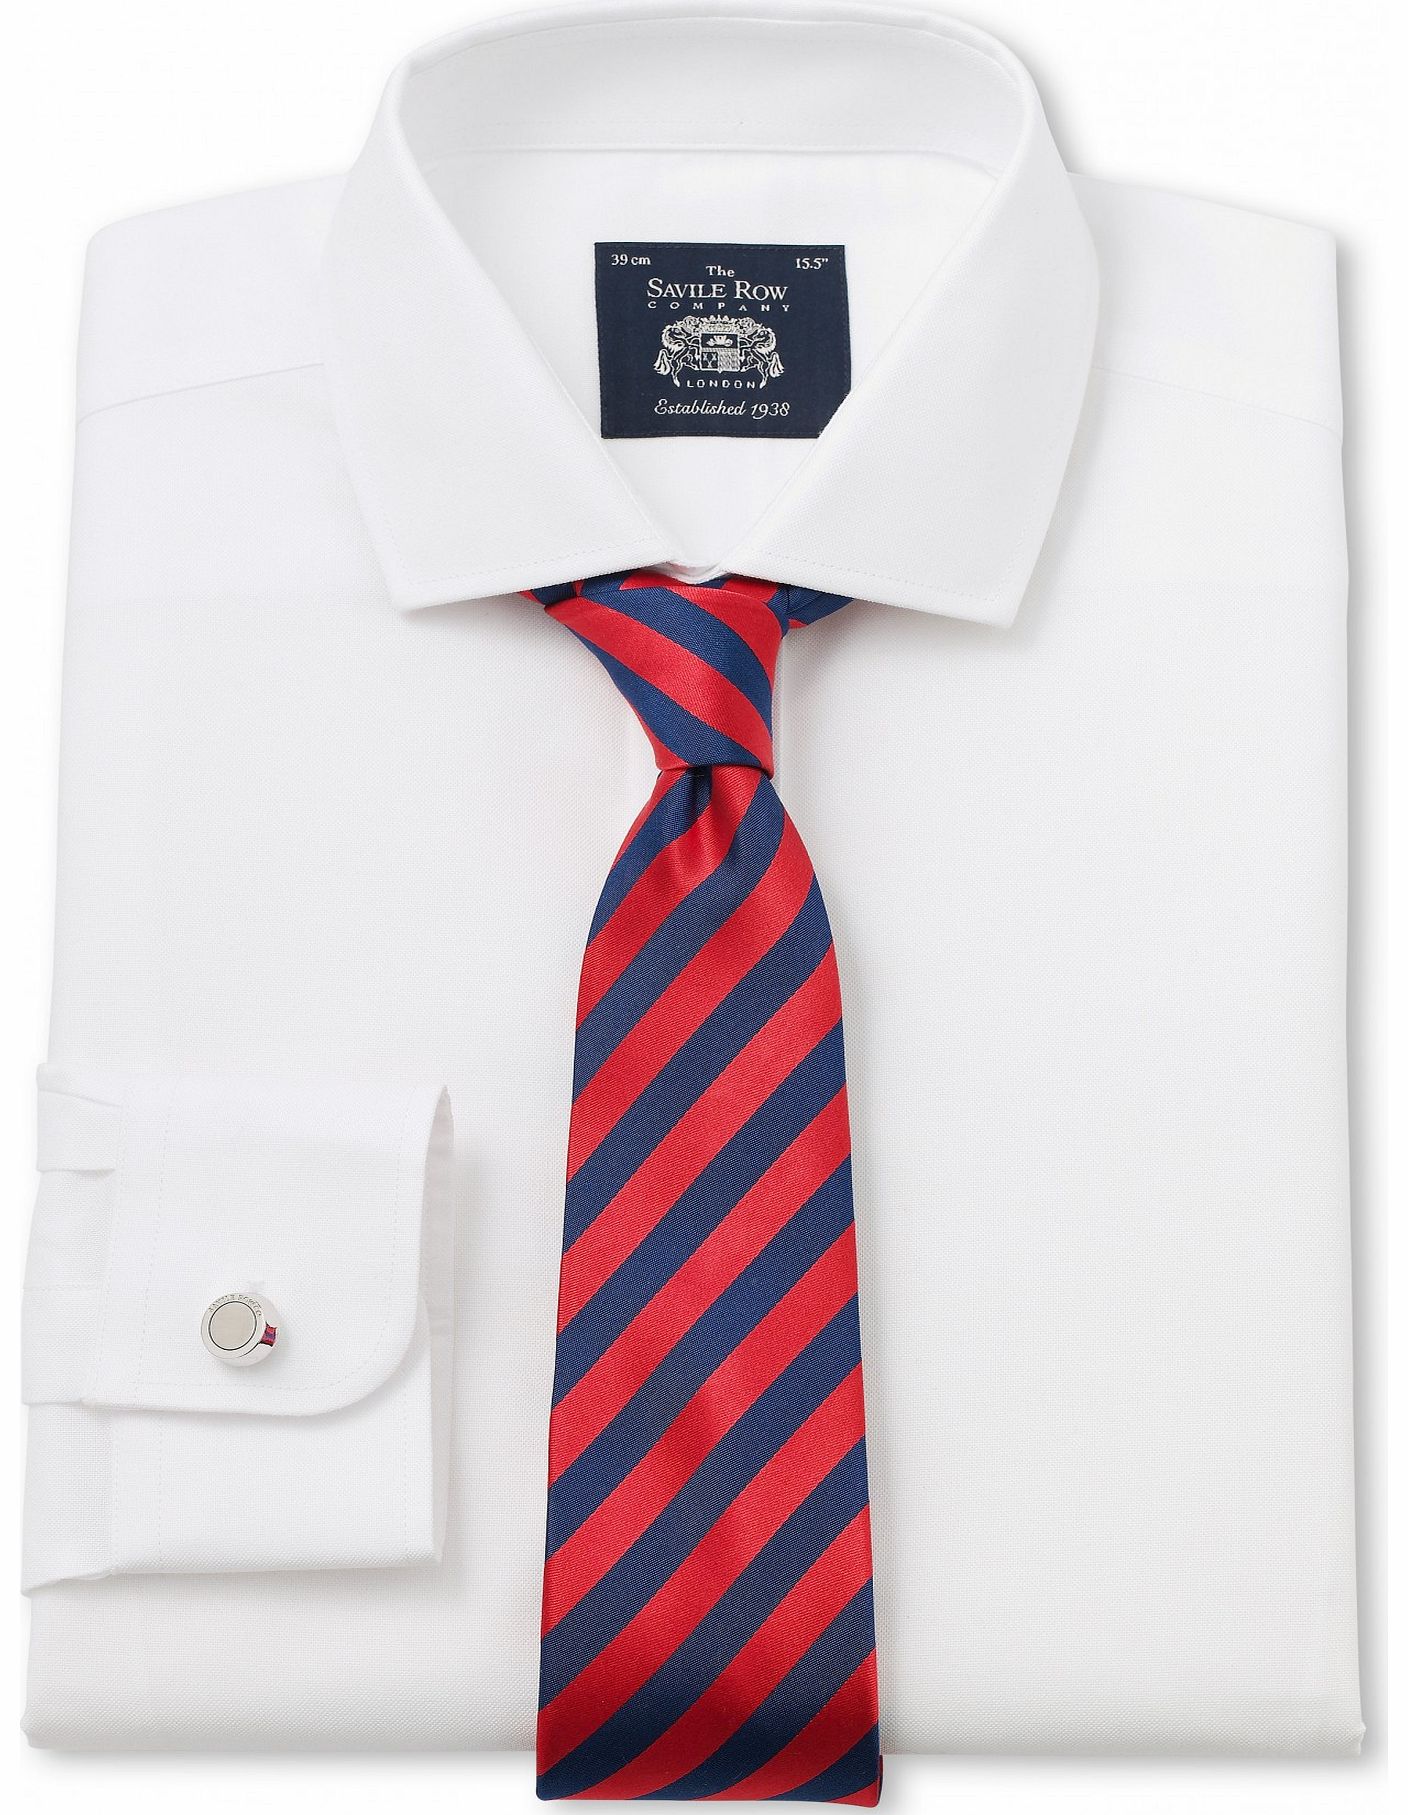 Savile Row Company White Pinpoint Extra Slim Fit Shirt 15`` Double